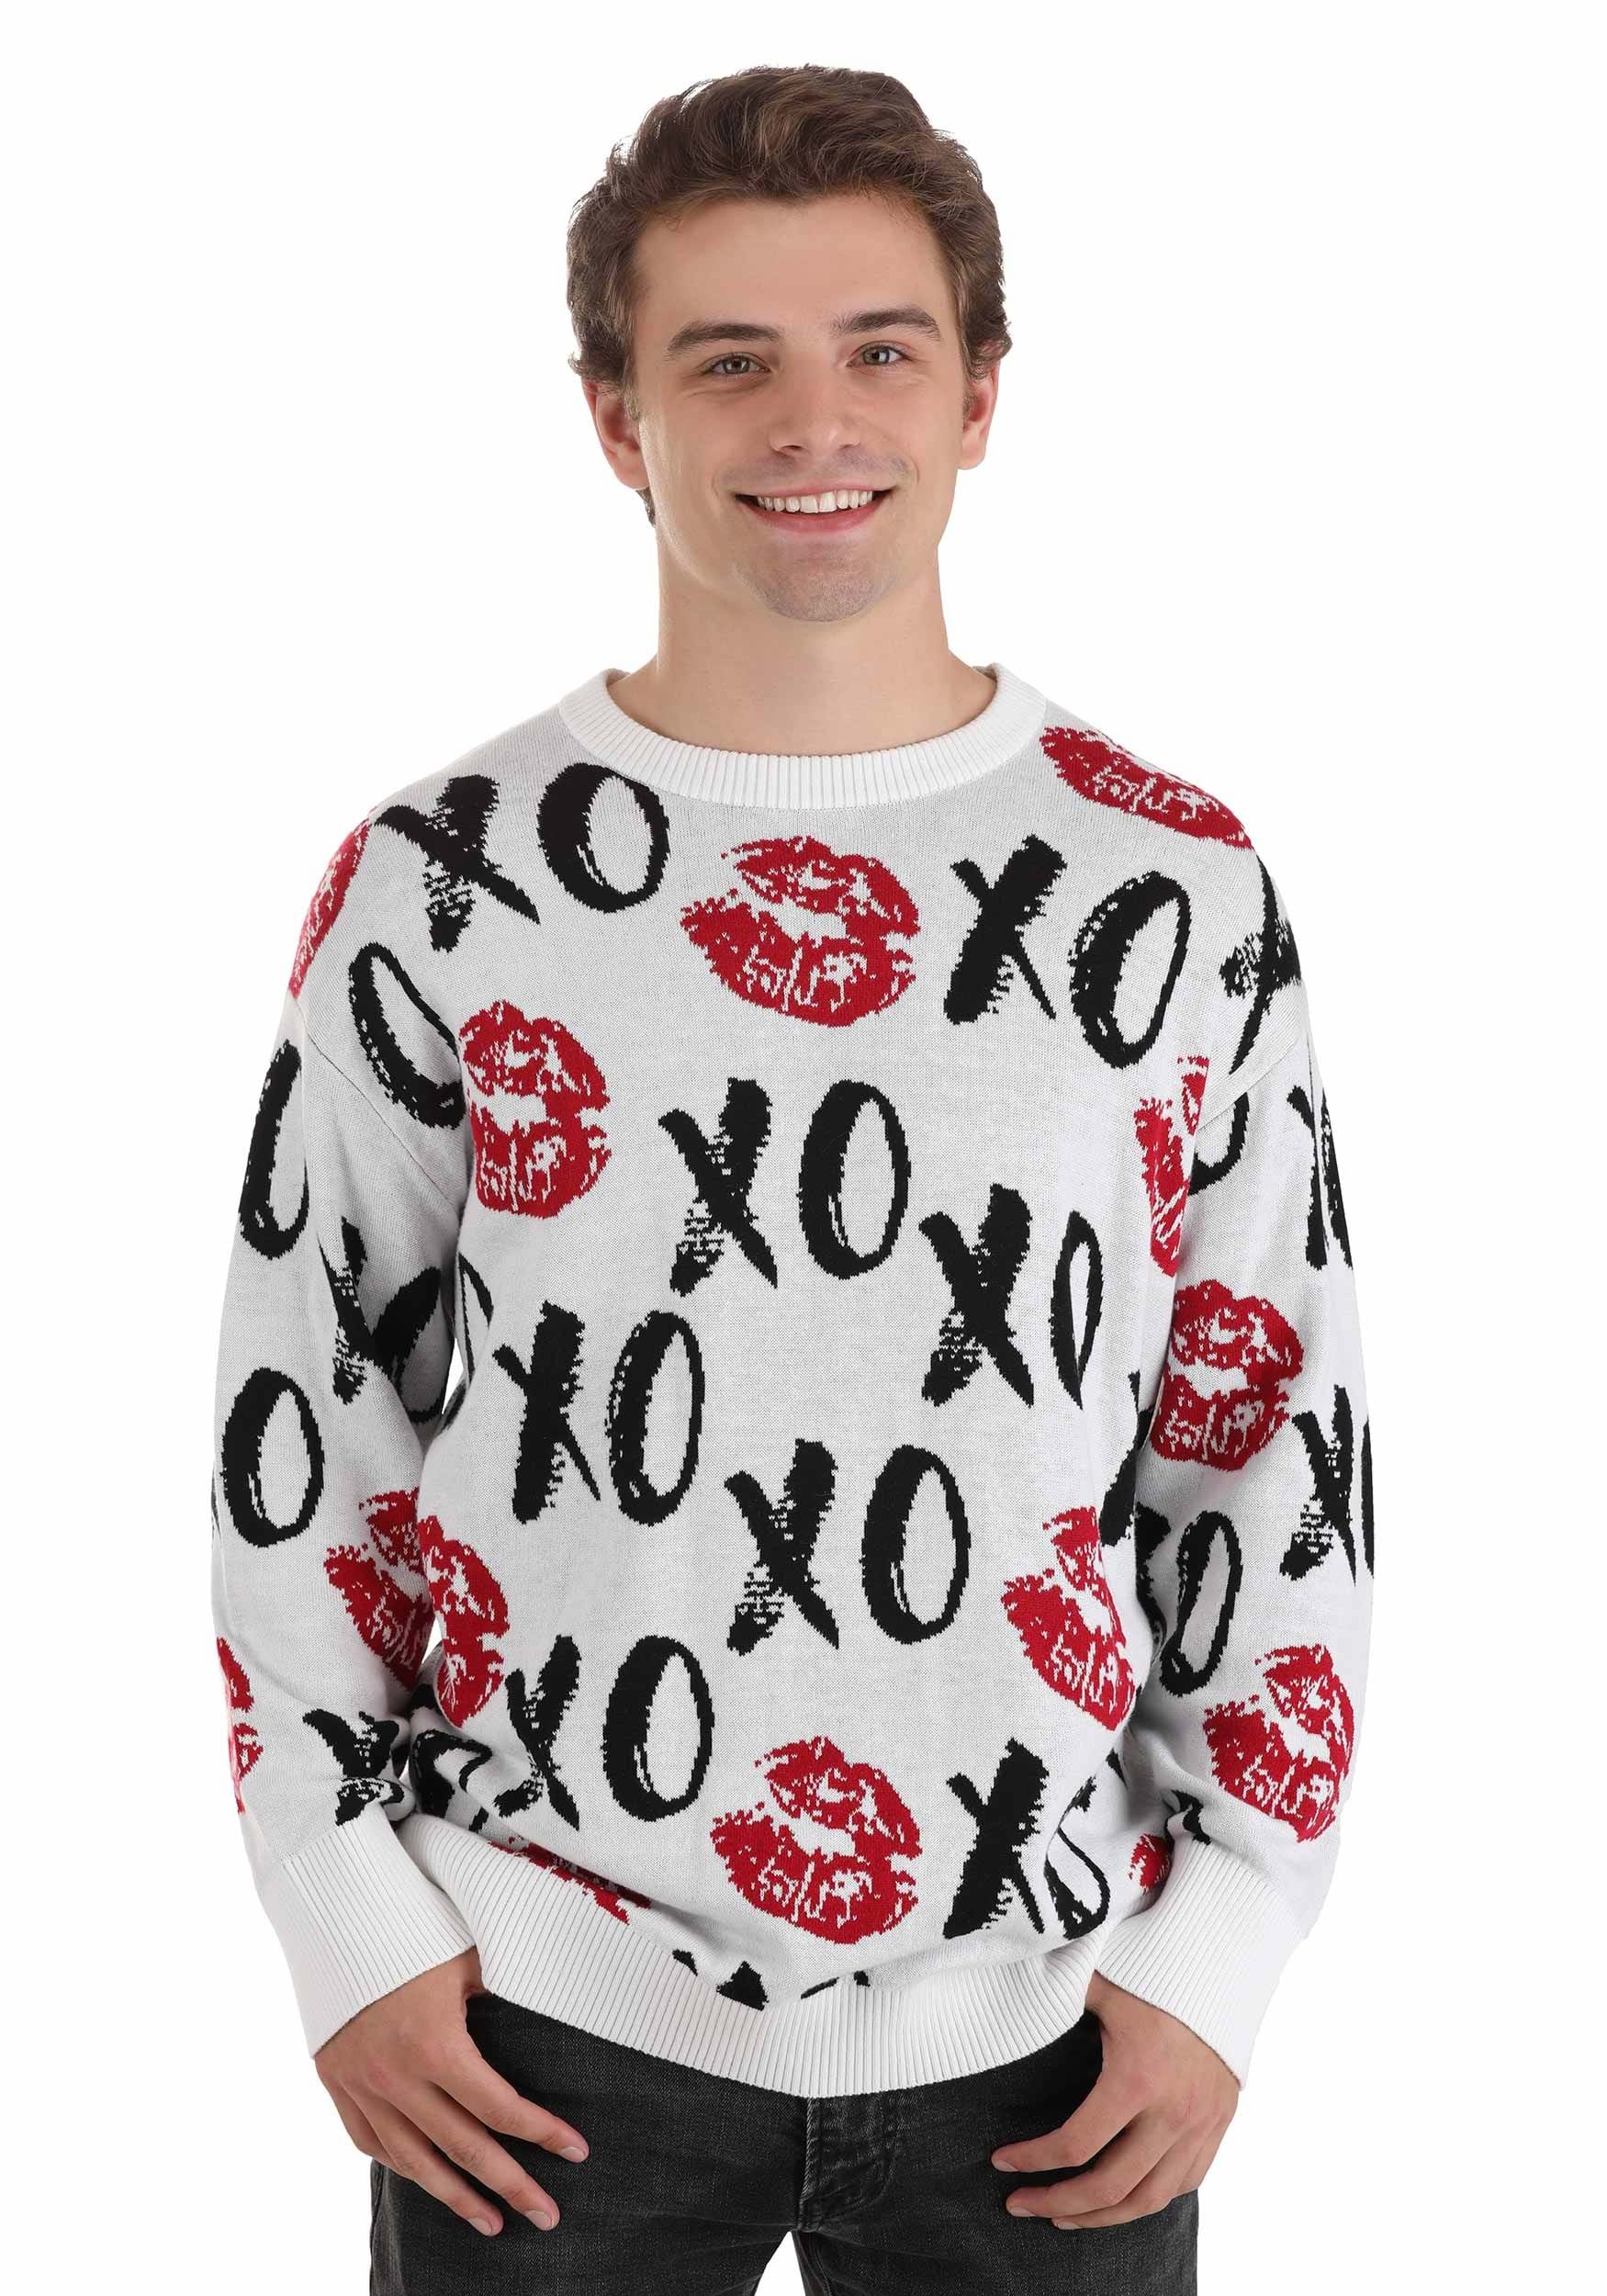 Photos - Fancy Dress A&D FUN Wear Adult Hugs and Kisses Valentine's Day Sweater Black/Red/W 